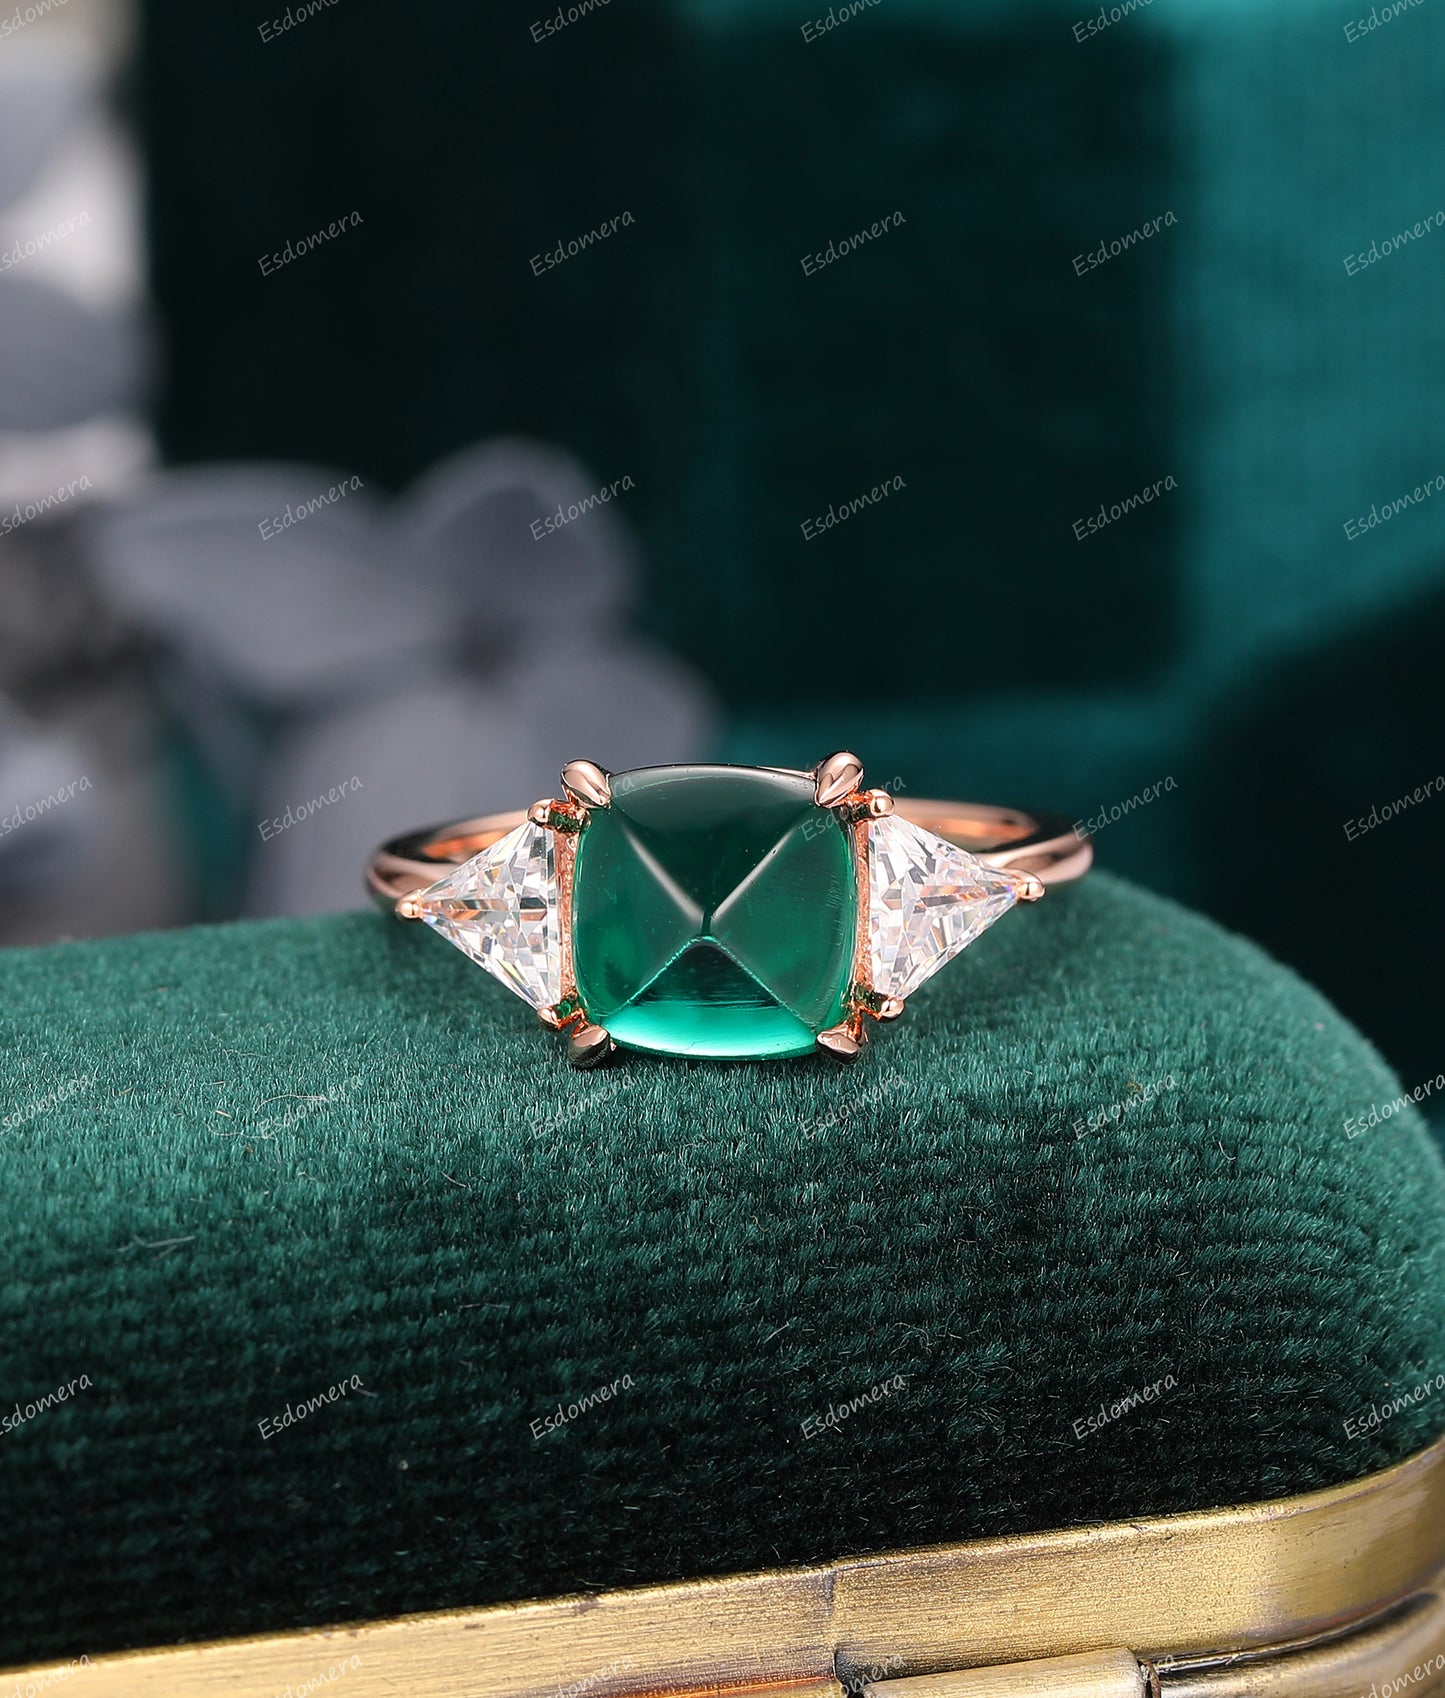 Triangle Moissanite Bridal Ring, Cushion Sugar Load Cut 8mm Emerald Promise Ring, Art Deco 14k Soild Gold Ring, Anniversary Gift For Her